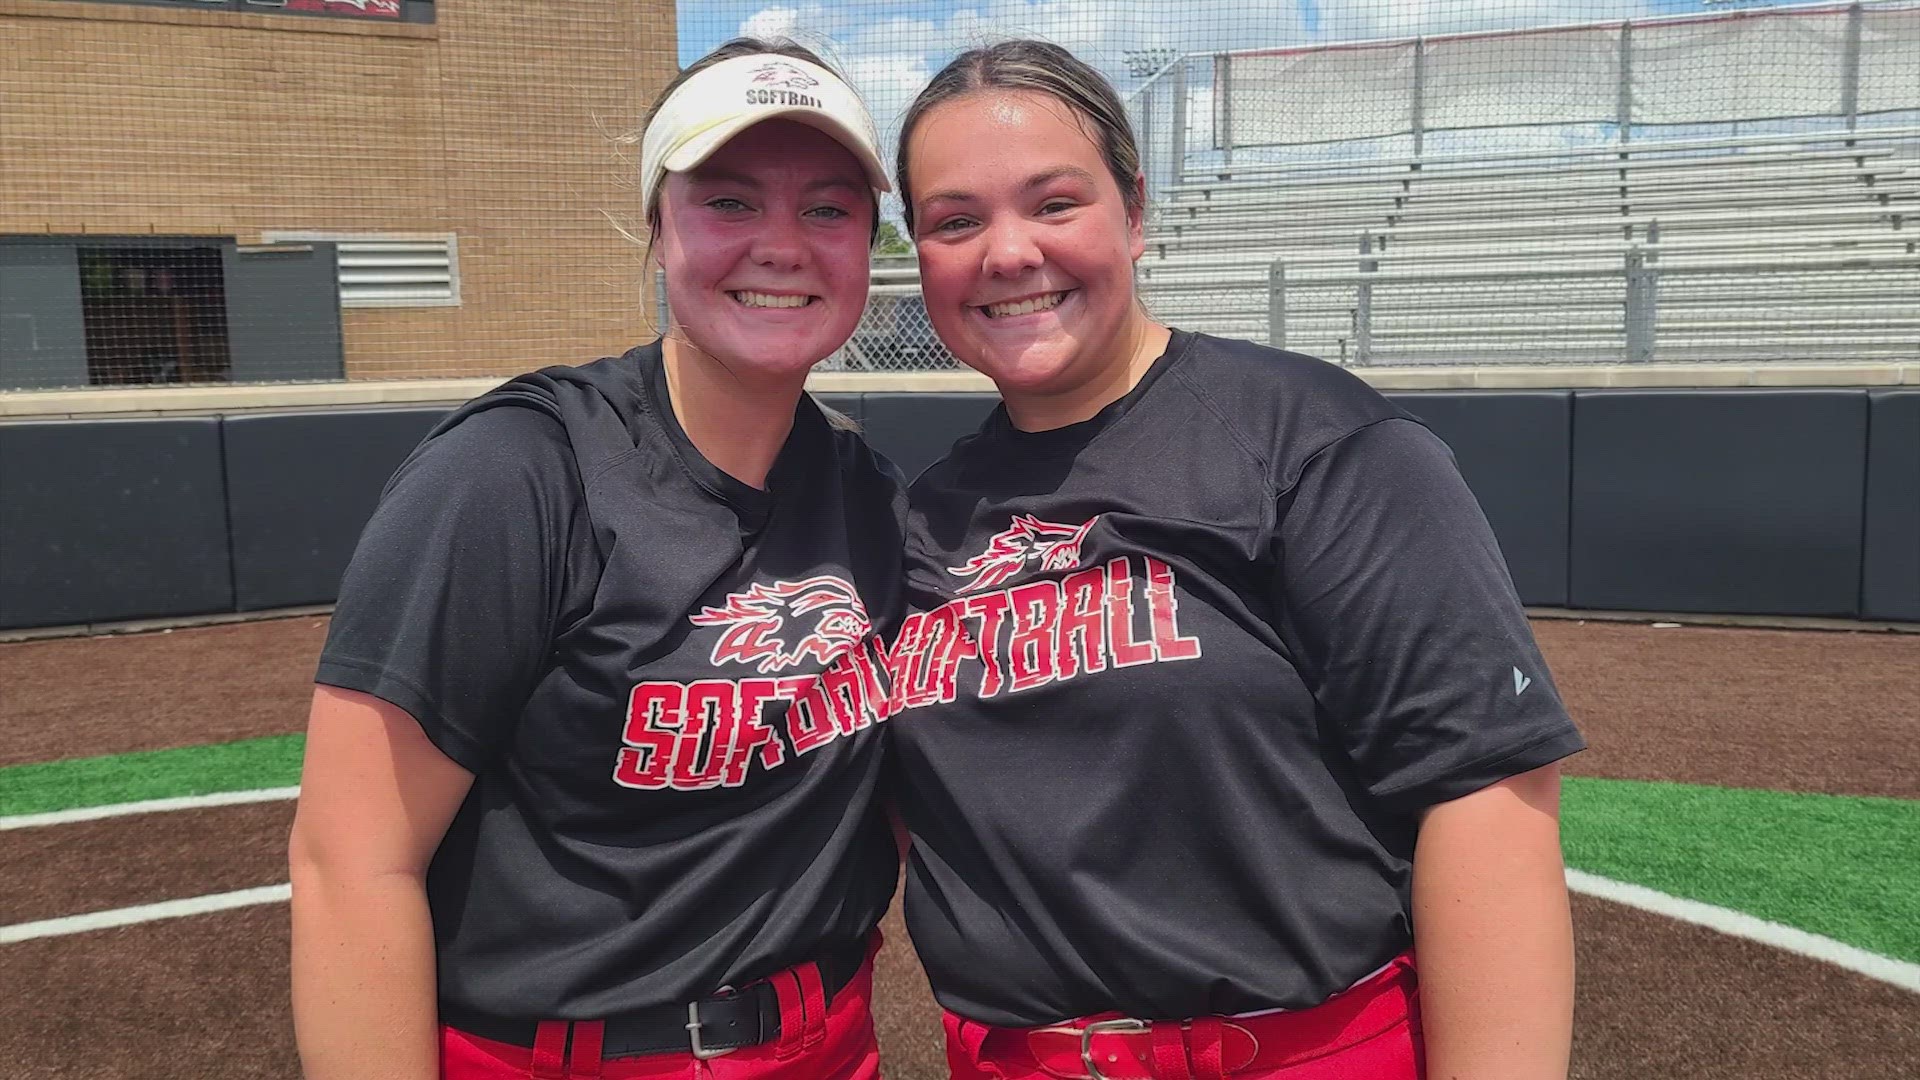 Emily Simmons is the star pitcher and home run hitter. Kasey is her catcher with a near-perfect fielding percentage. "They're in sync. They're hard workers."